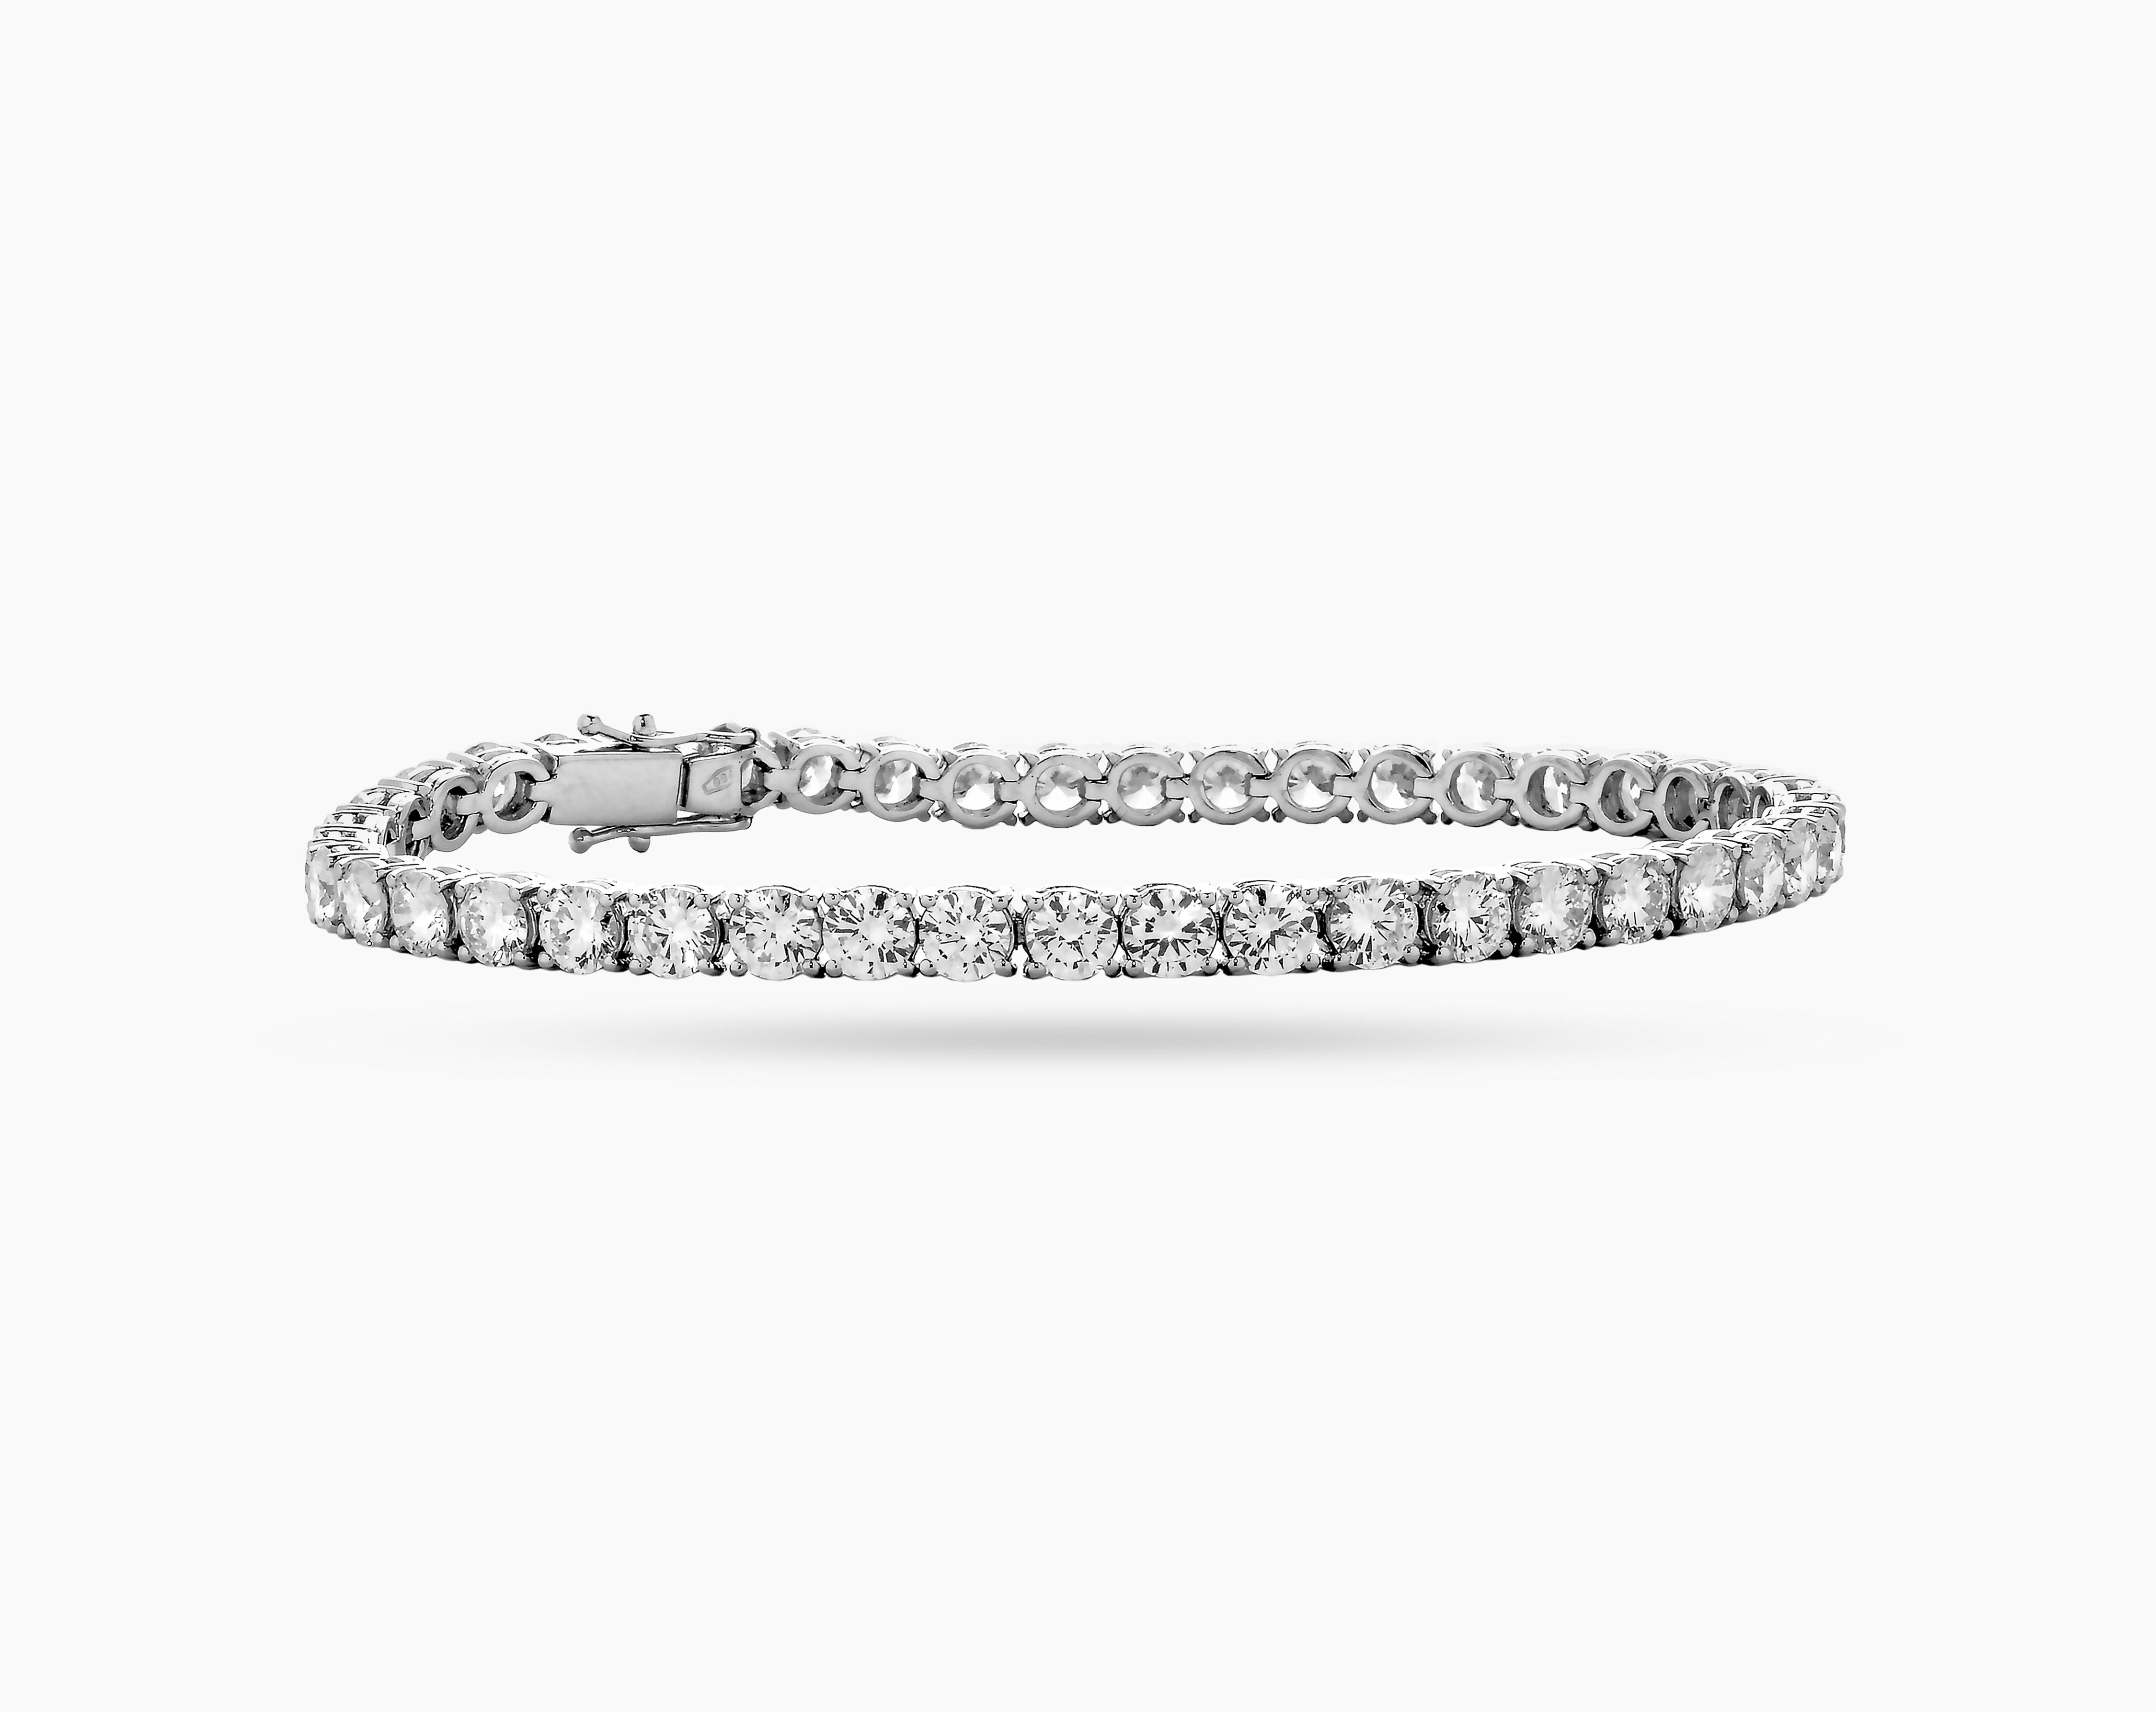 HRD (Antwerp diamond high council) certified 10.07 carats E/F-VVS/VS diamonds tennis bracelet from CARON Fine jewellery.

 An impressive example of the classical tennis bracelet made famous by Chris Evert is this bracelet in 18k white gold with 43